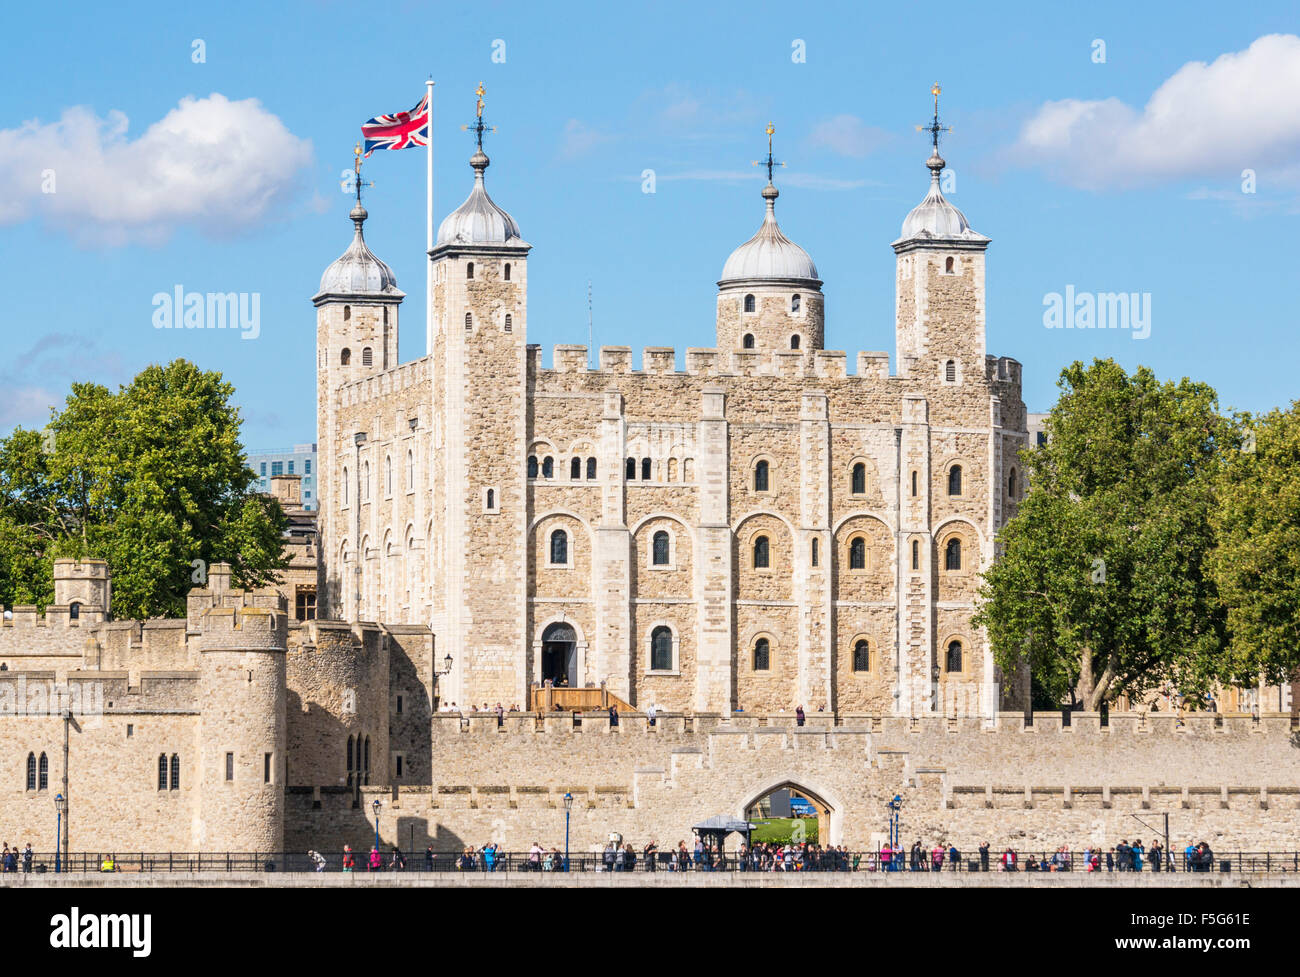 The white tower and castle walls Tower of London view City of London England GB UK EU Europe Stock Photo